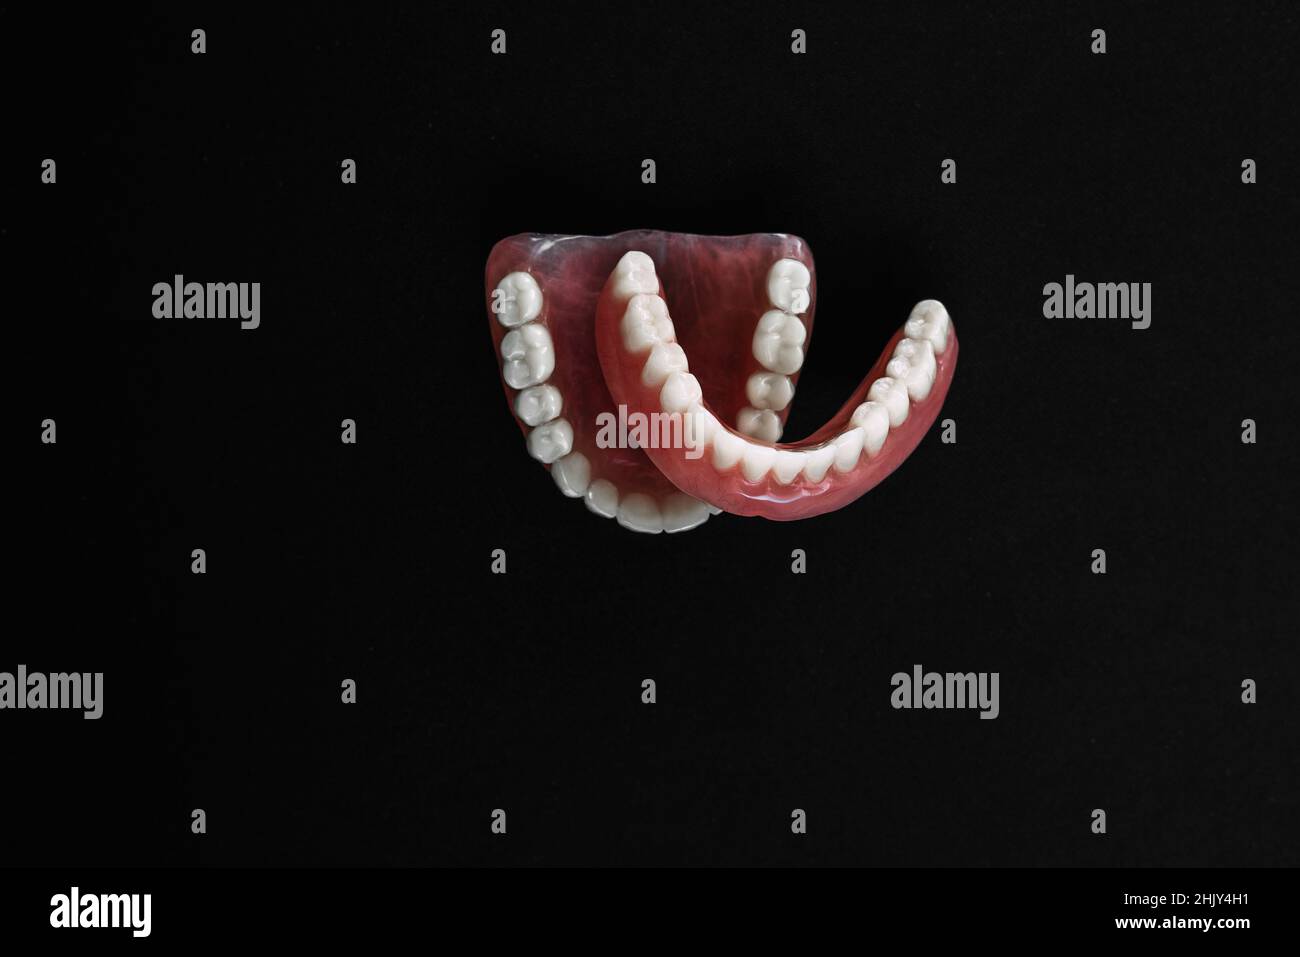 Full removable plastic denture of the jaws. A set of dentures on a black background. Two acrylic dentures. Upper and lower jaws with fake teeth. Dentu Stock Photo